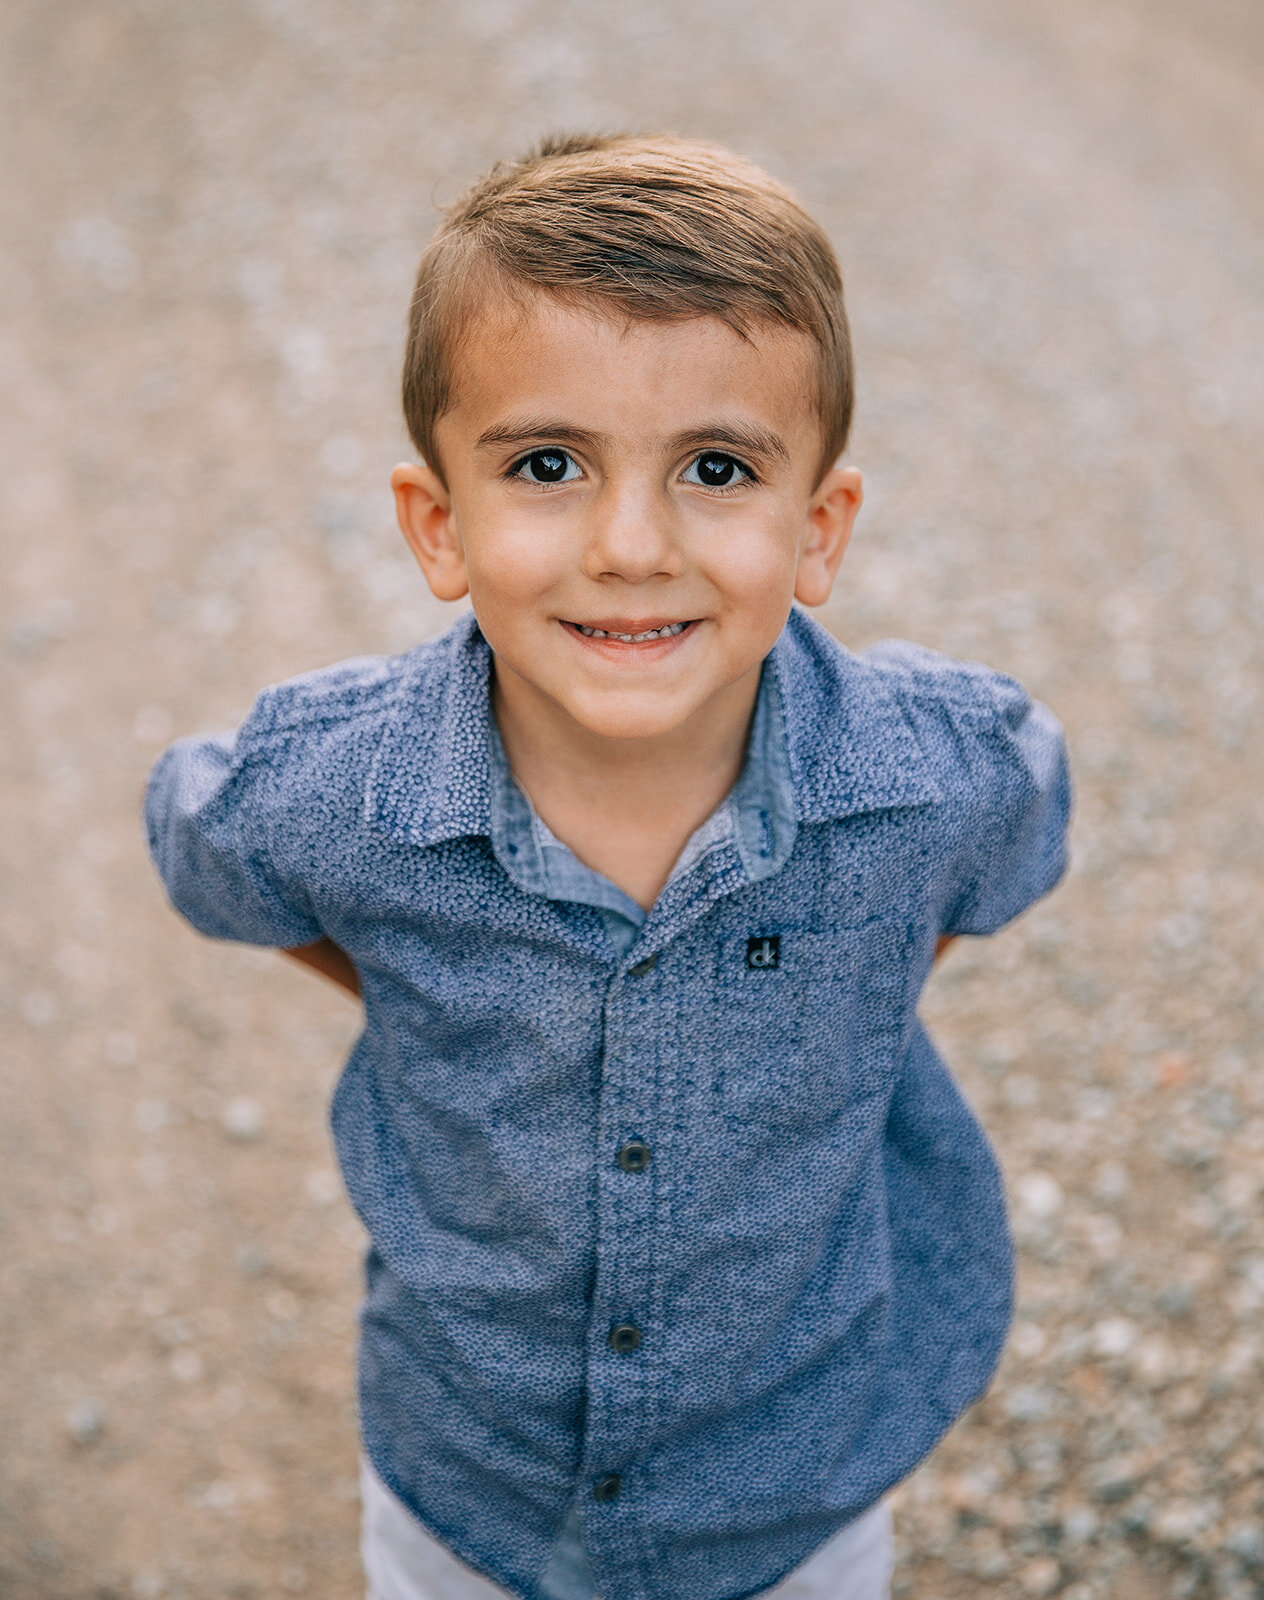  child portraits during family pictures with professional family photographer bella alder photography blue denim button up top young boy looking at the camera individual child photos of each kid during family photo session family pictures cute classy